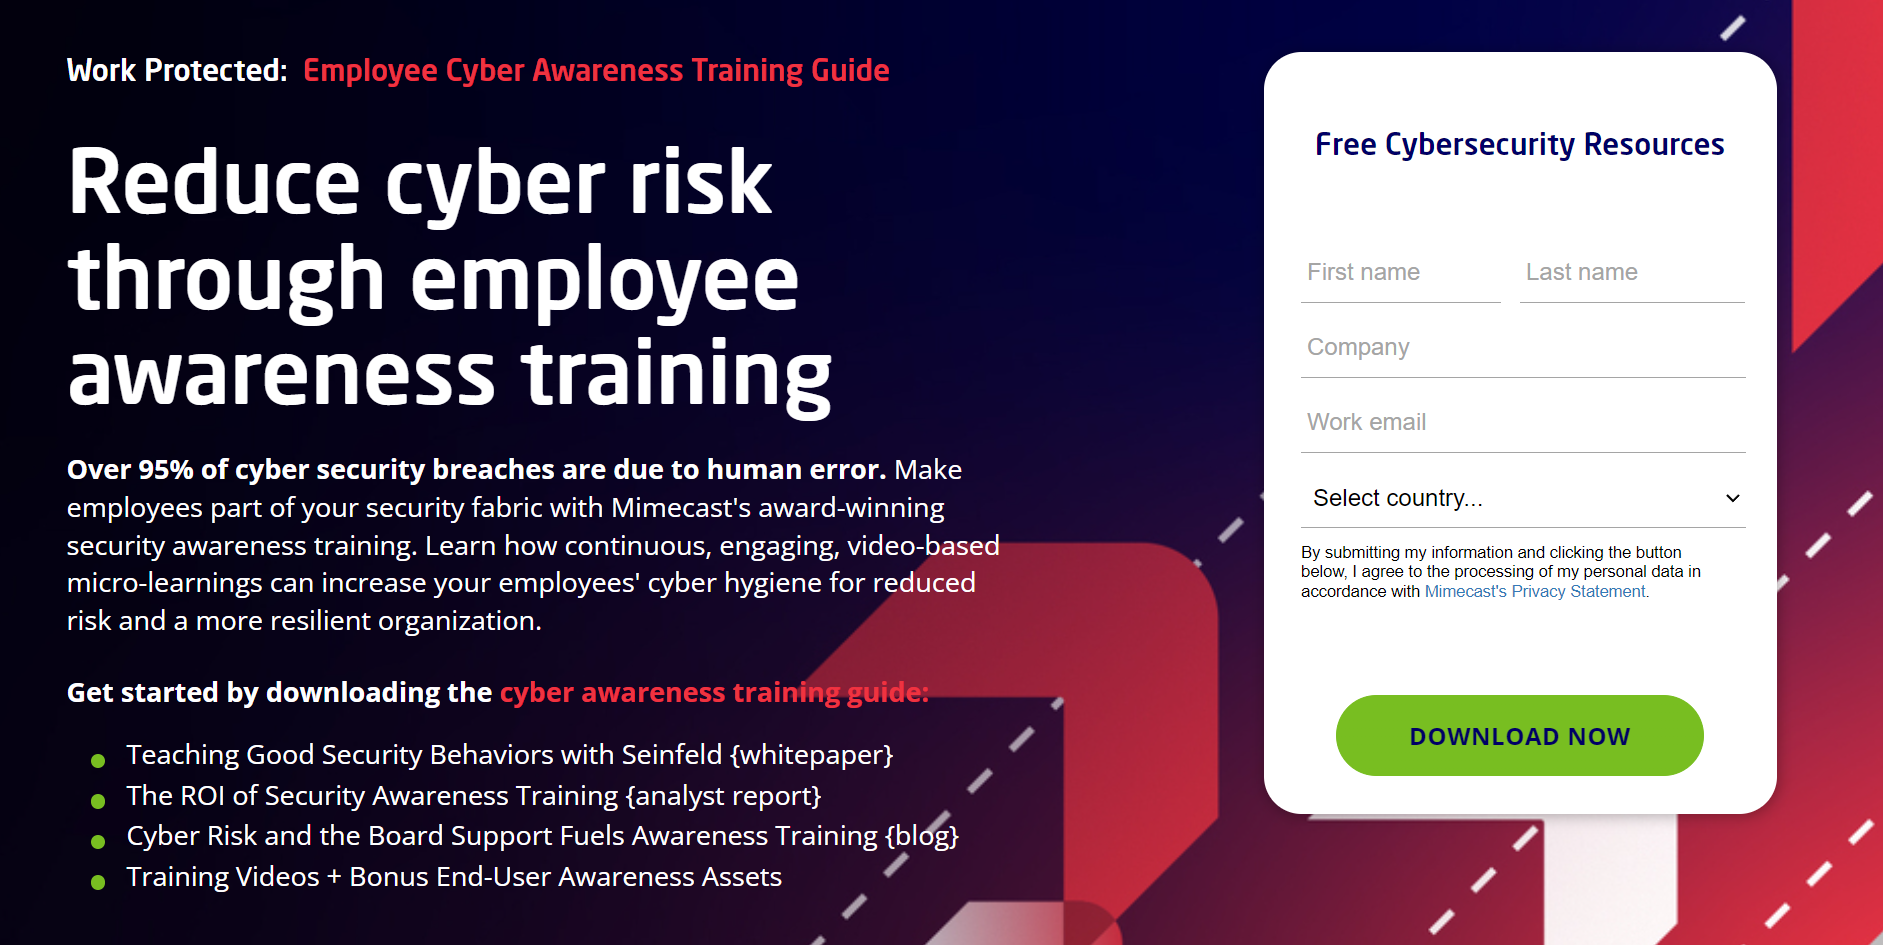 A paid ad from Mimecast promoting resources on its cybersecurity awareness training